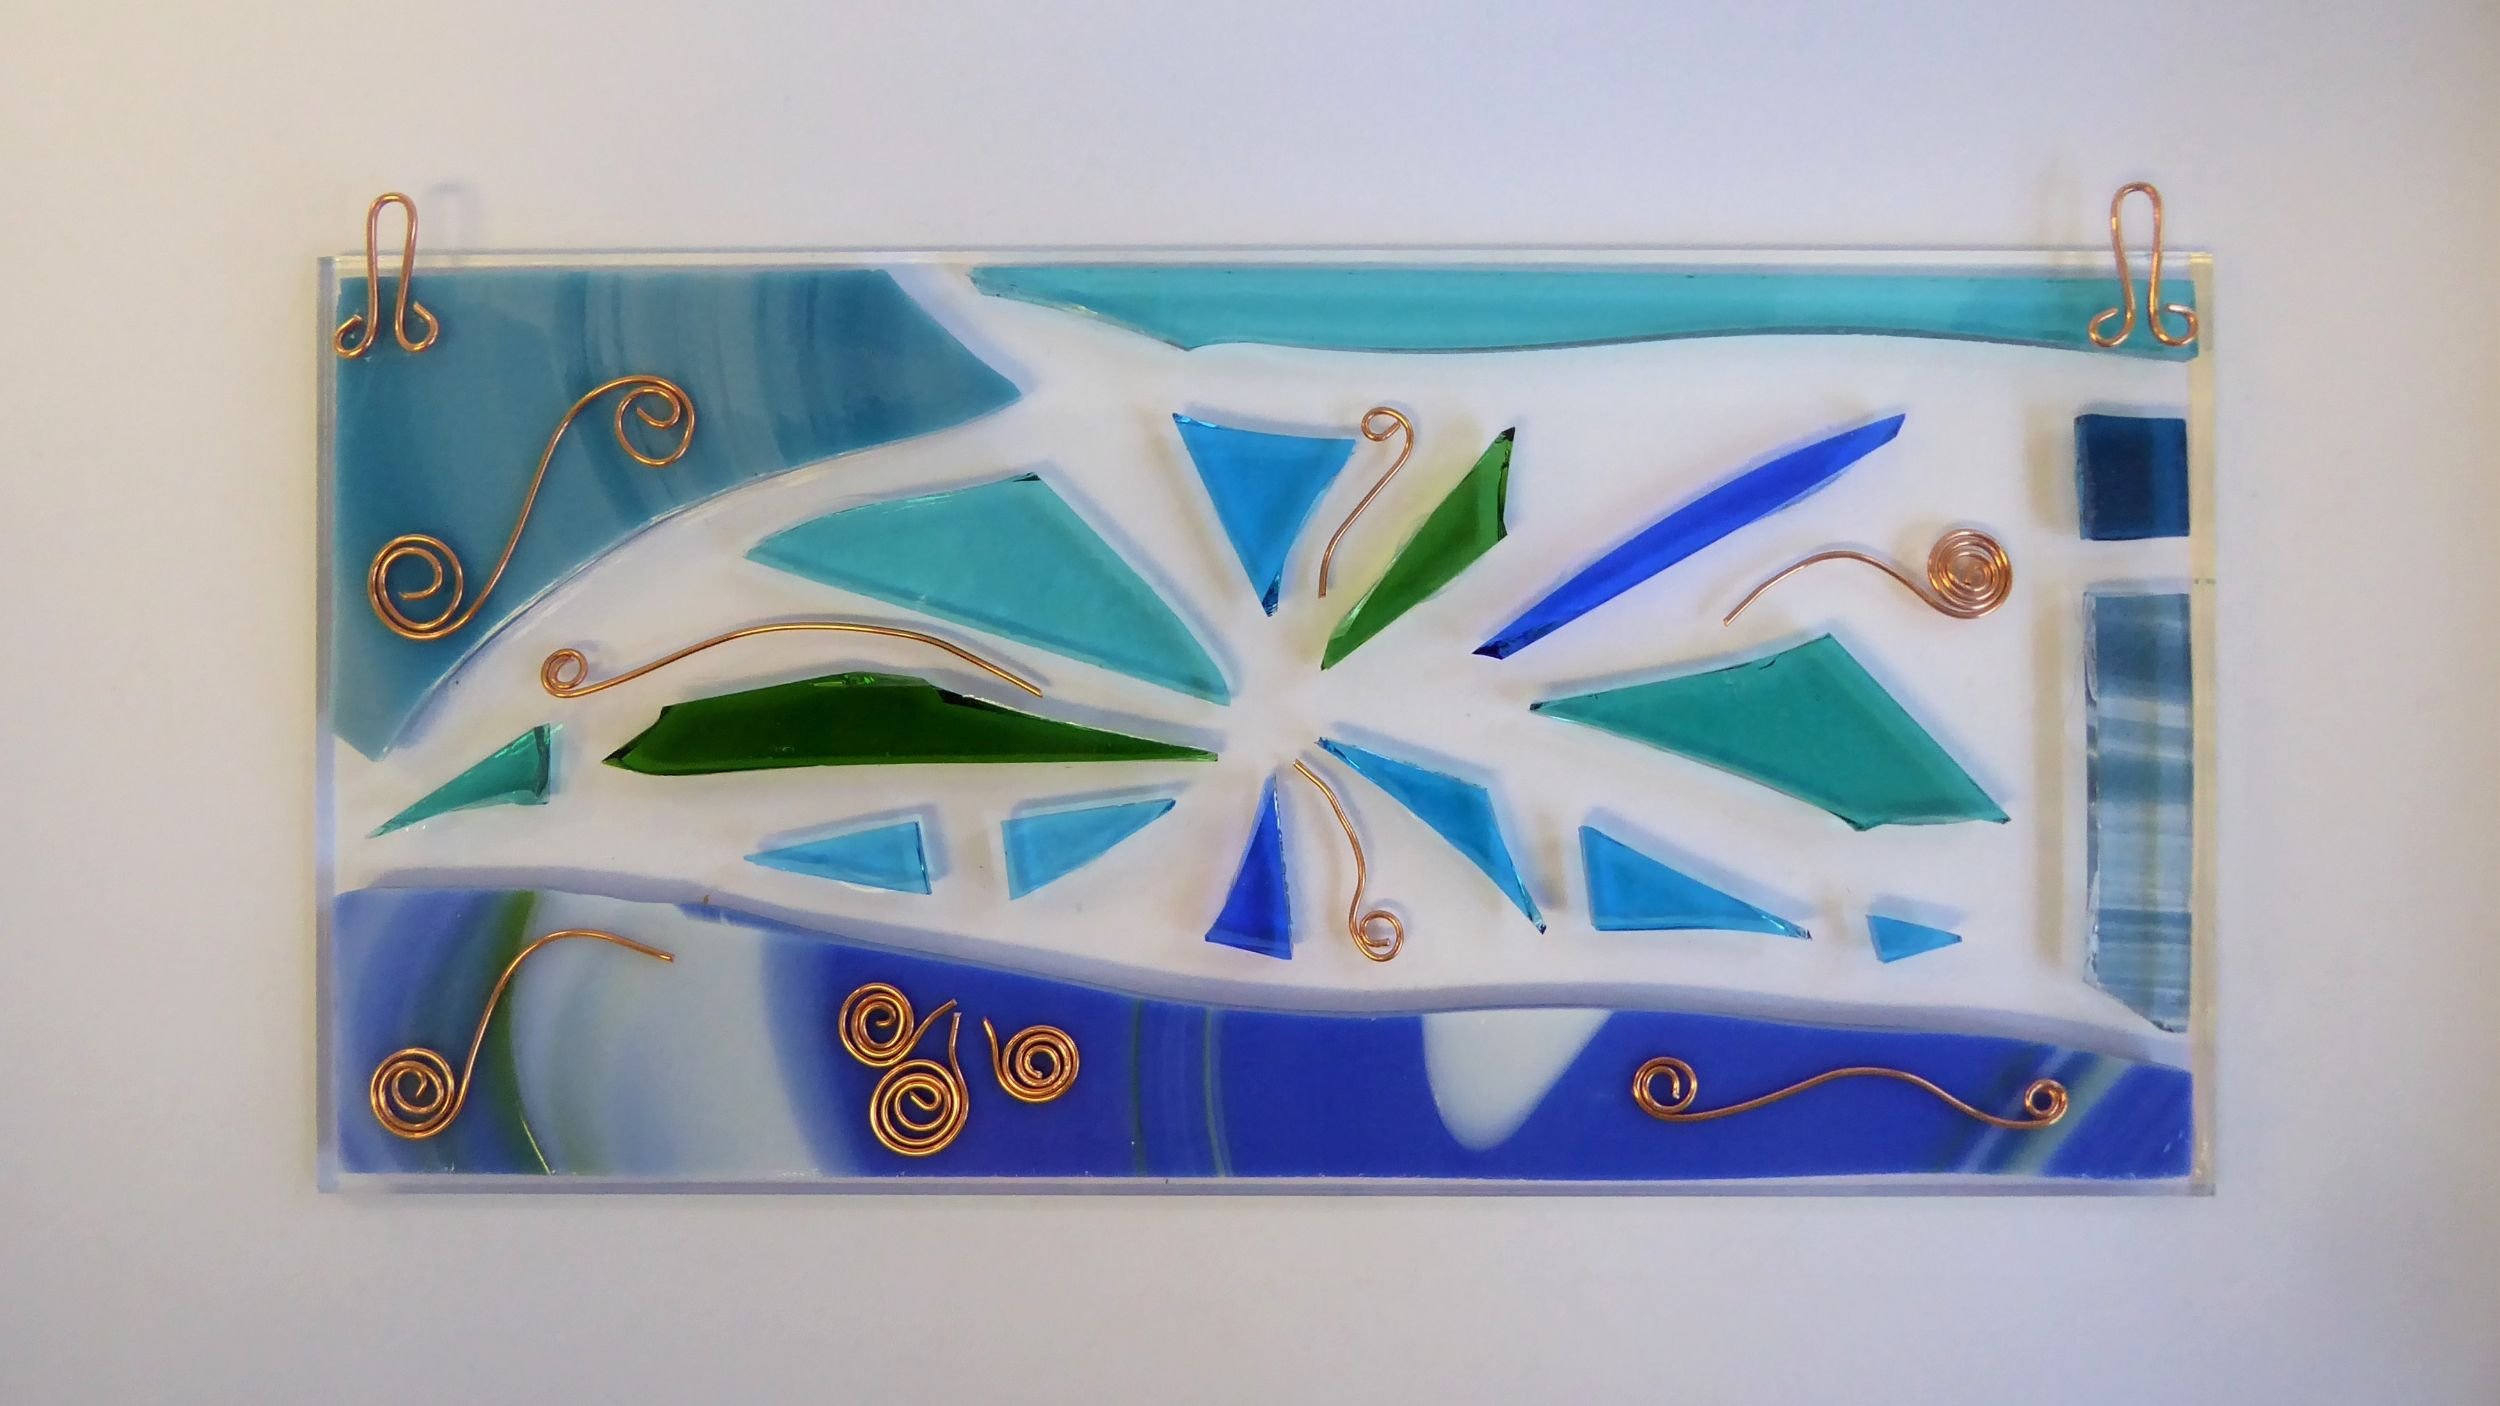 Fused glass wall panel in shades of blue and green created by Eva Glass Design.